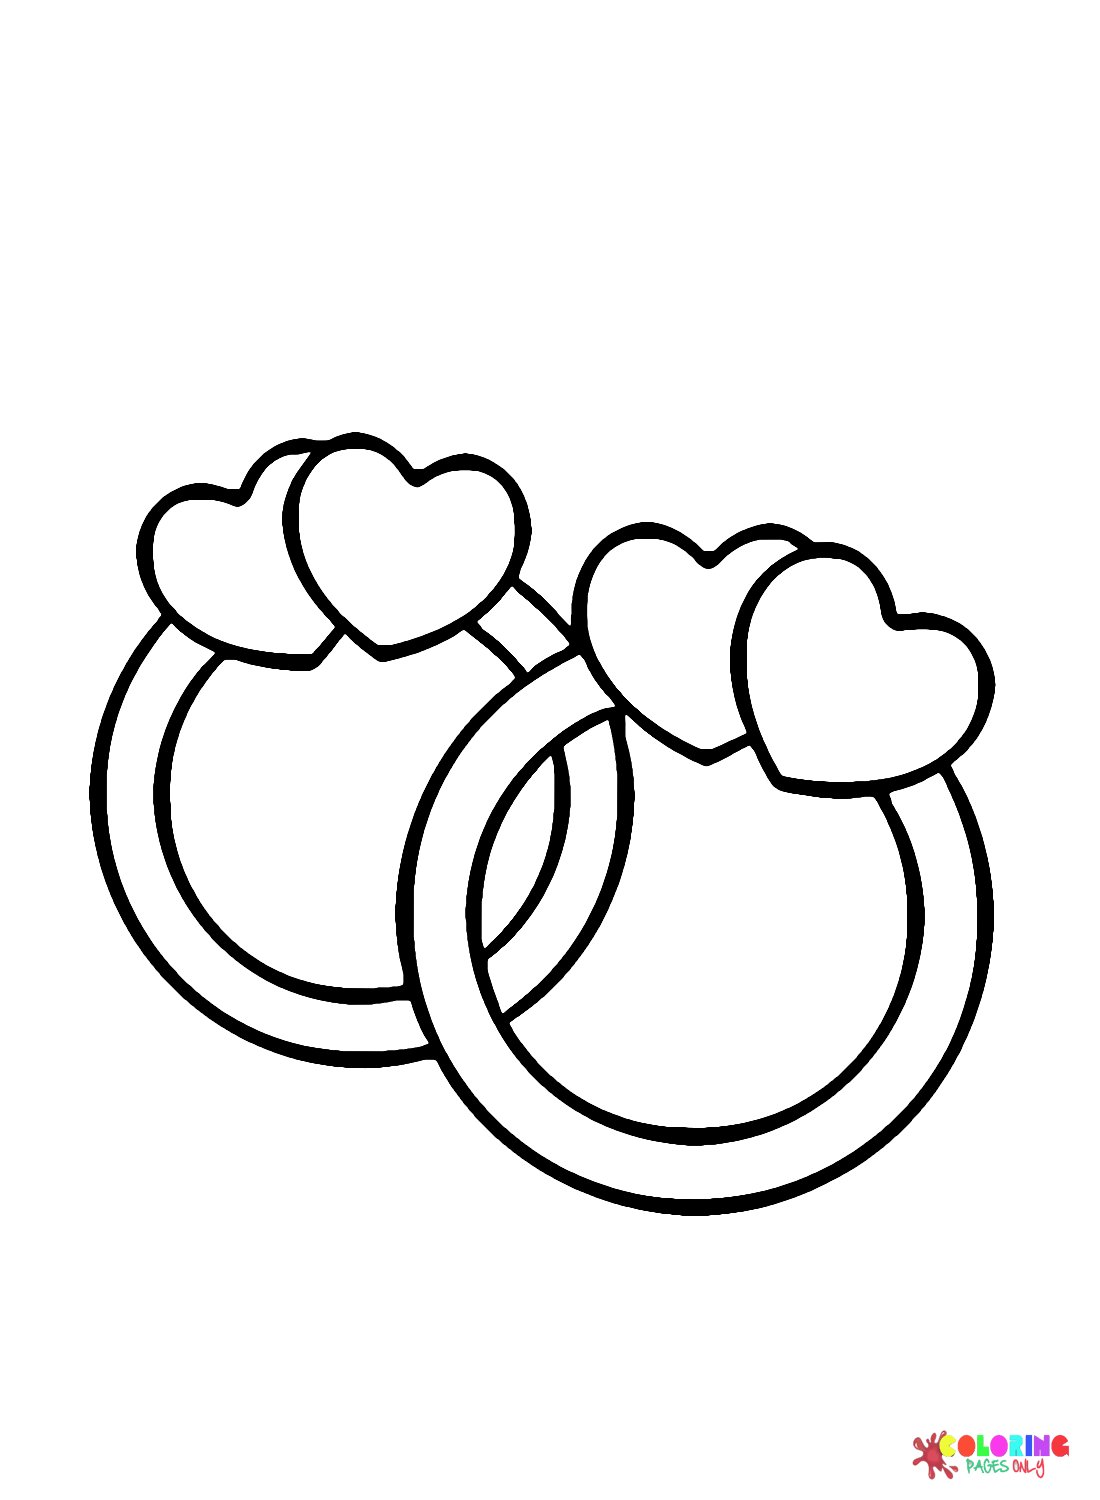 Wedding Rings with Heart Coloring Pages - Wedding Ring Coloring Pages ...